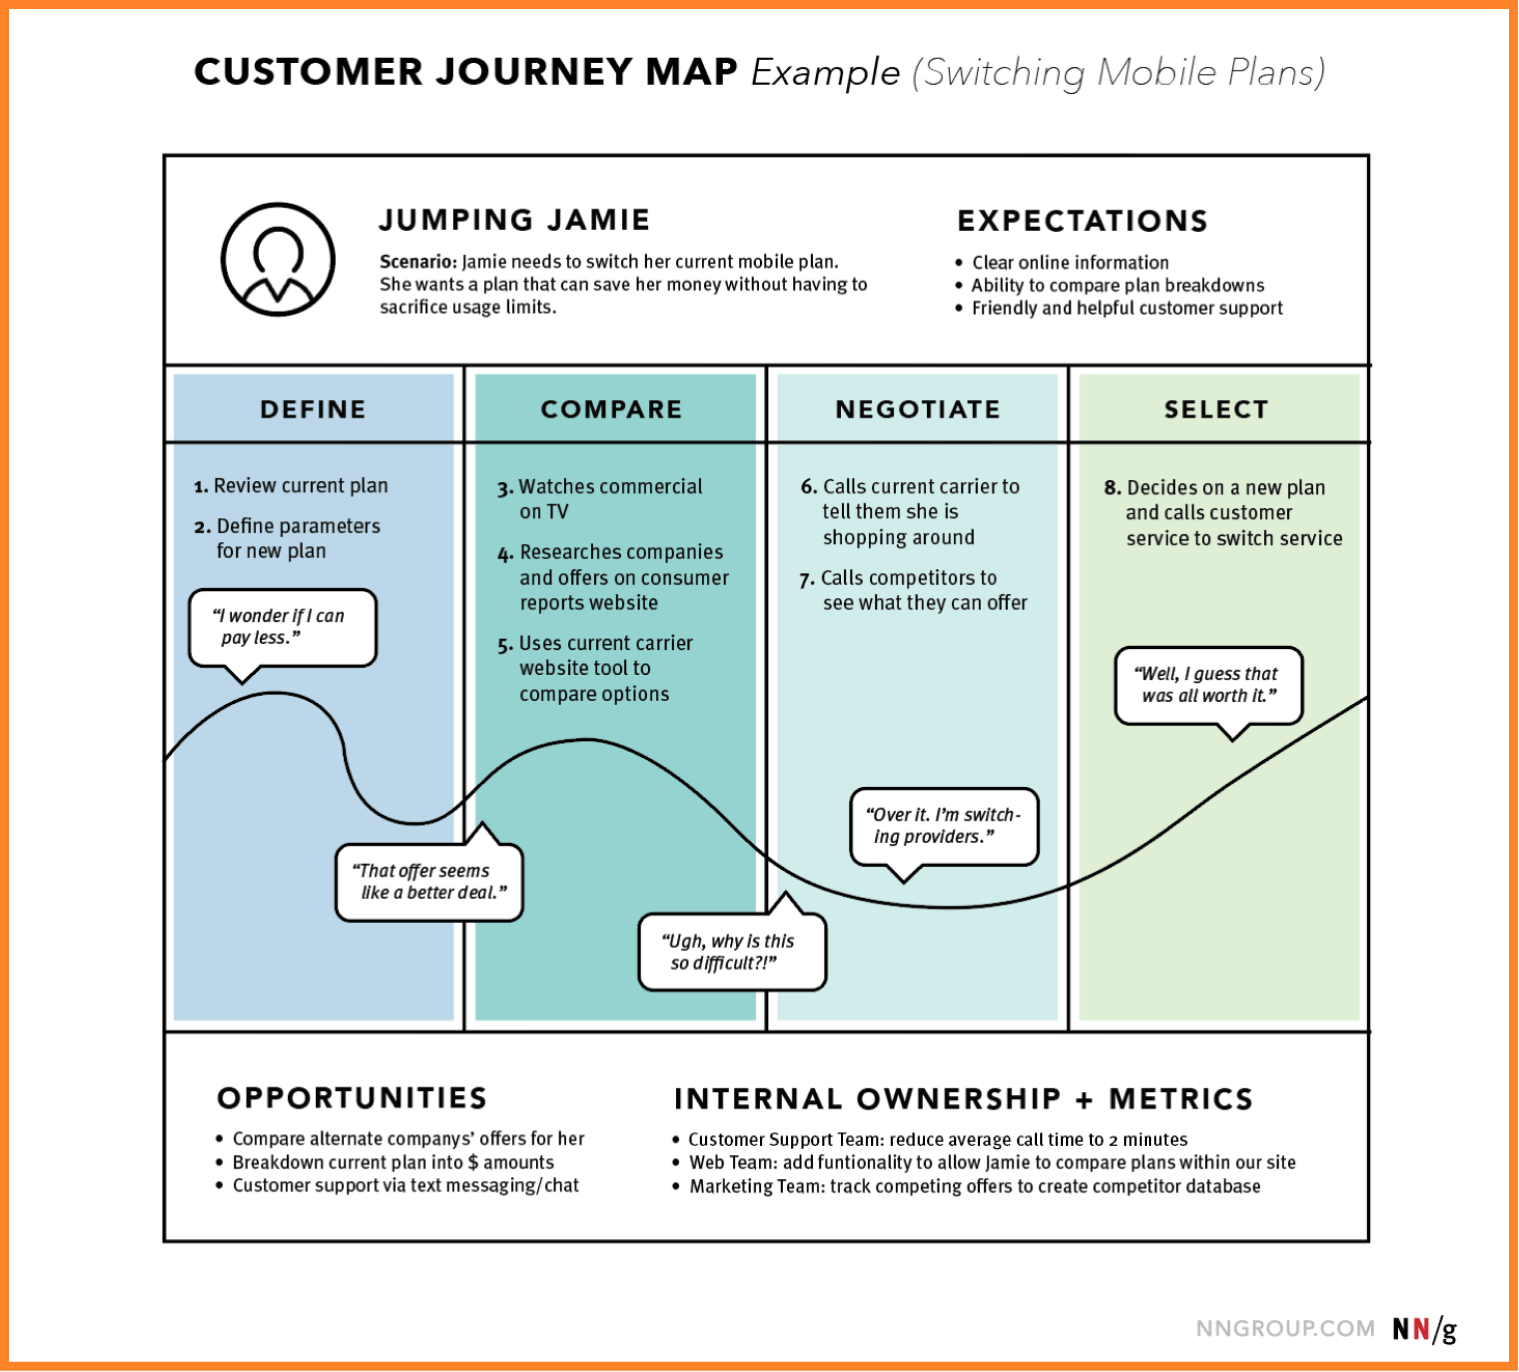 Current State Customer Journey Map